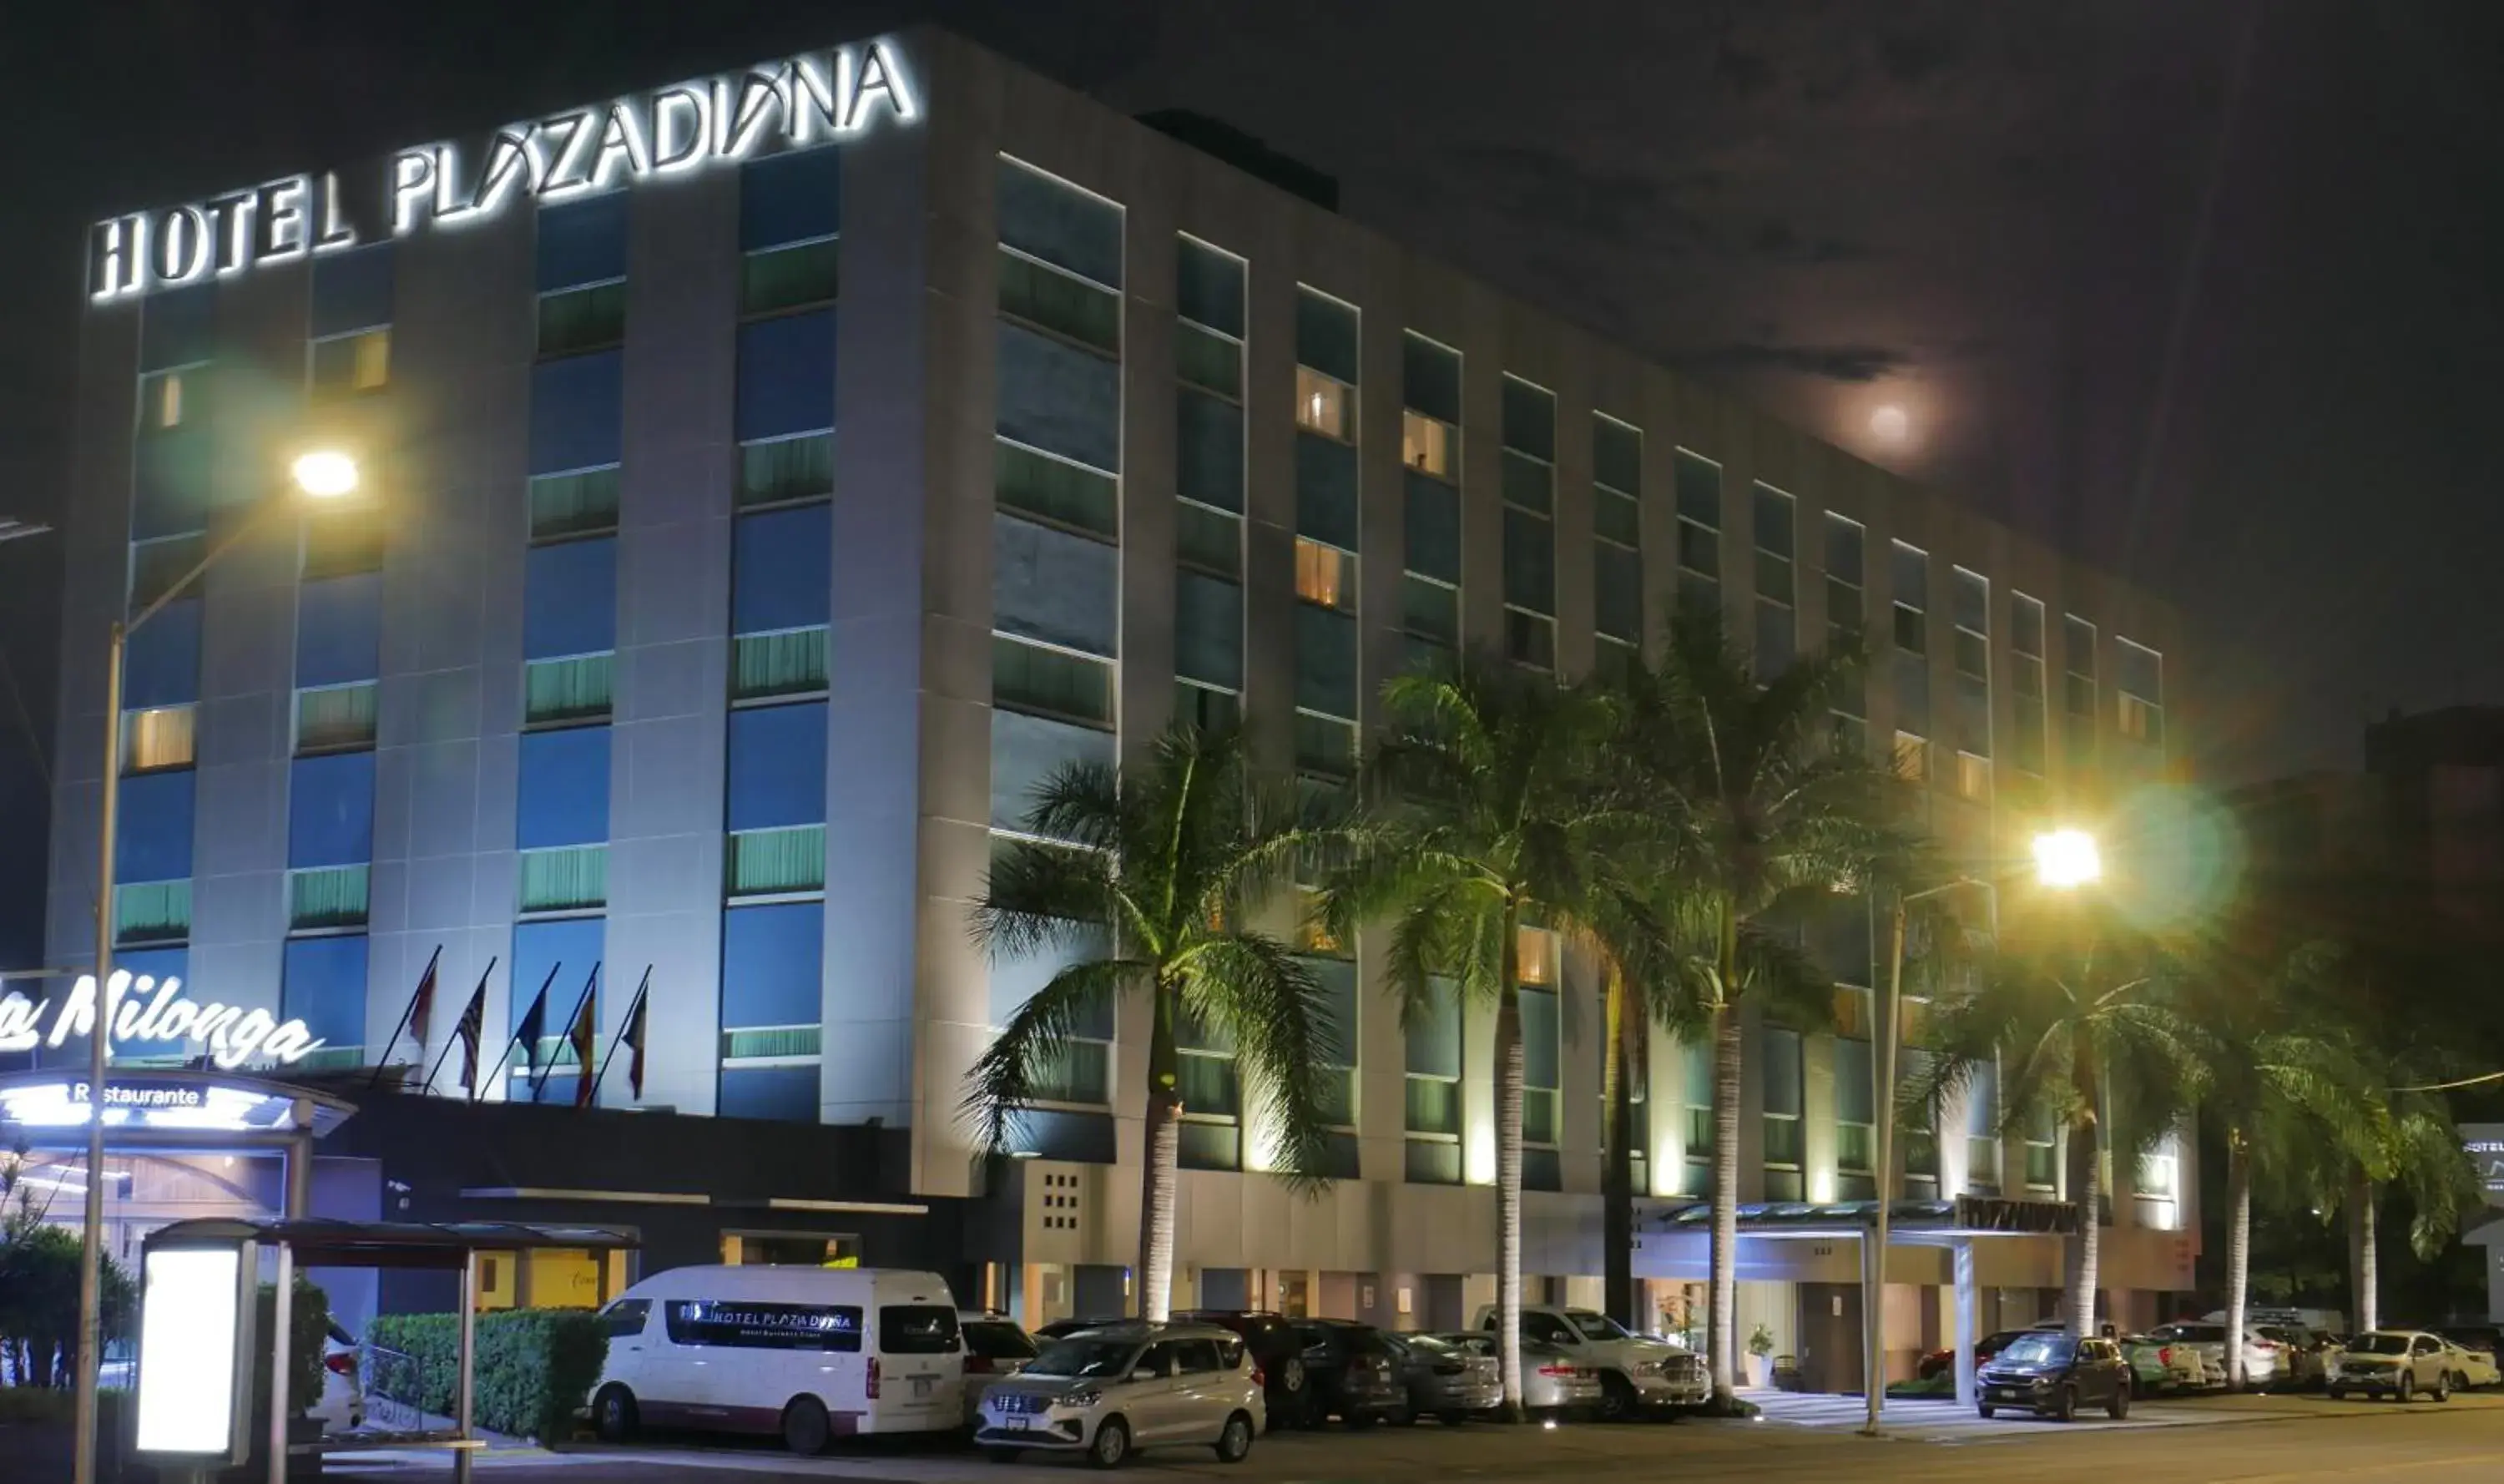 Property Building in Hotel Plaza Diana